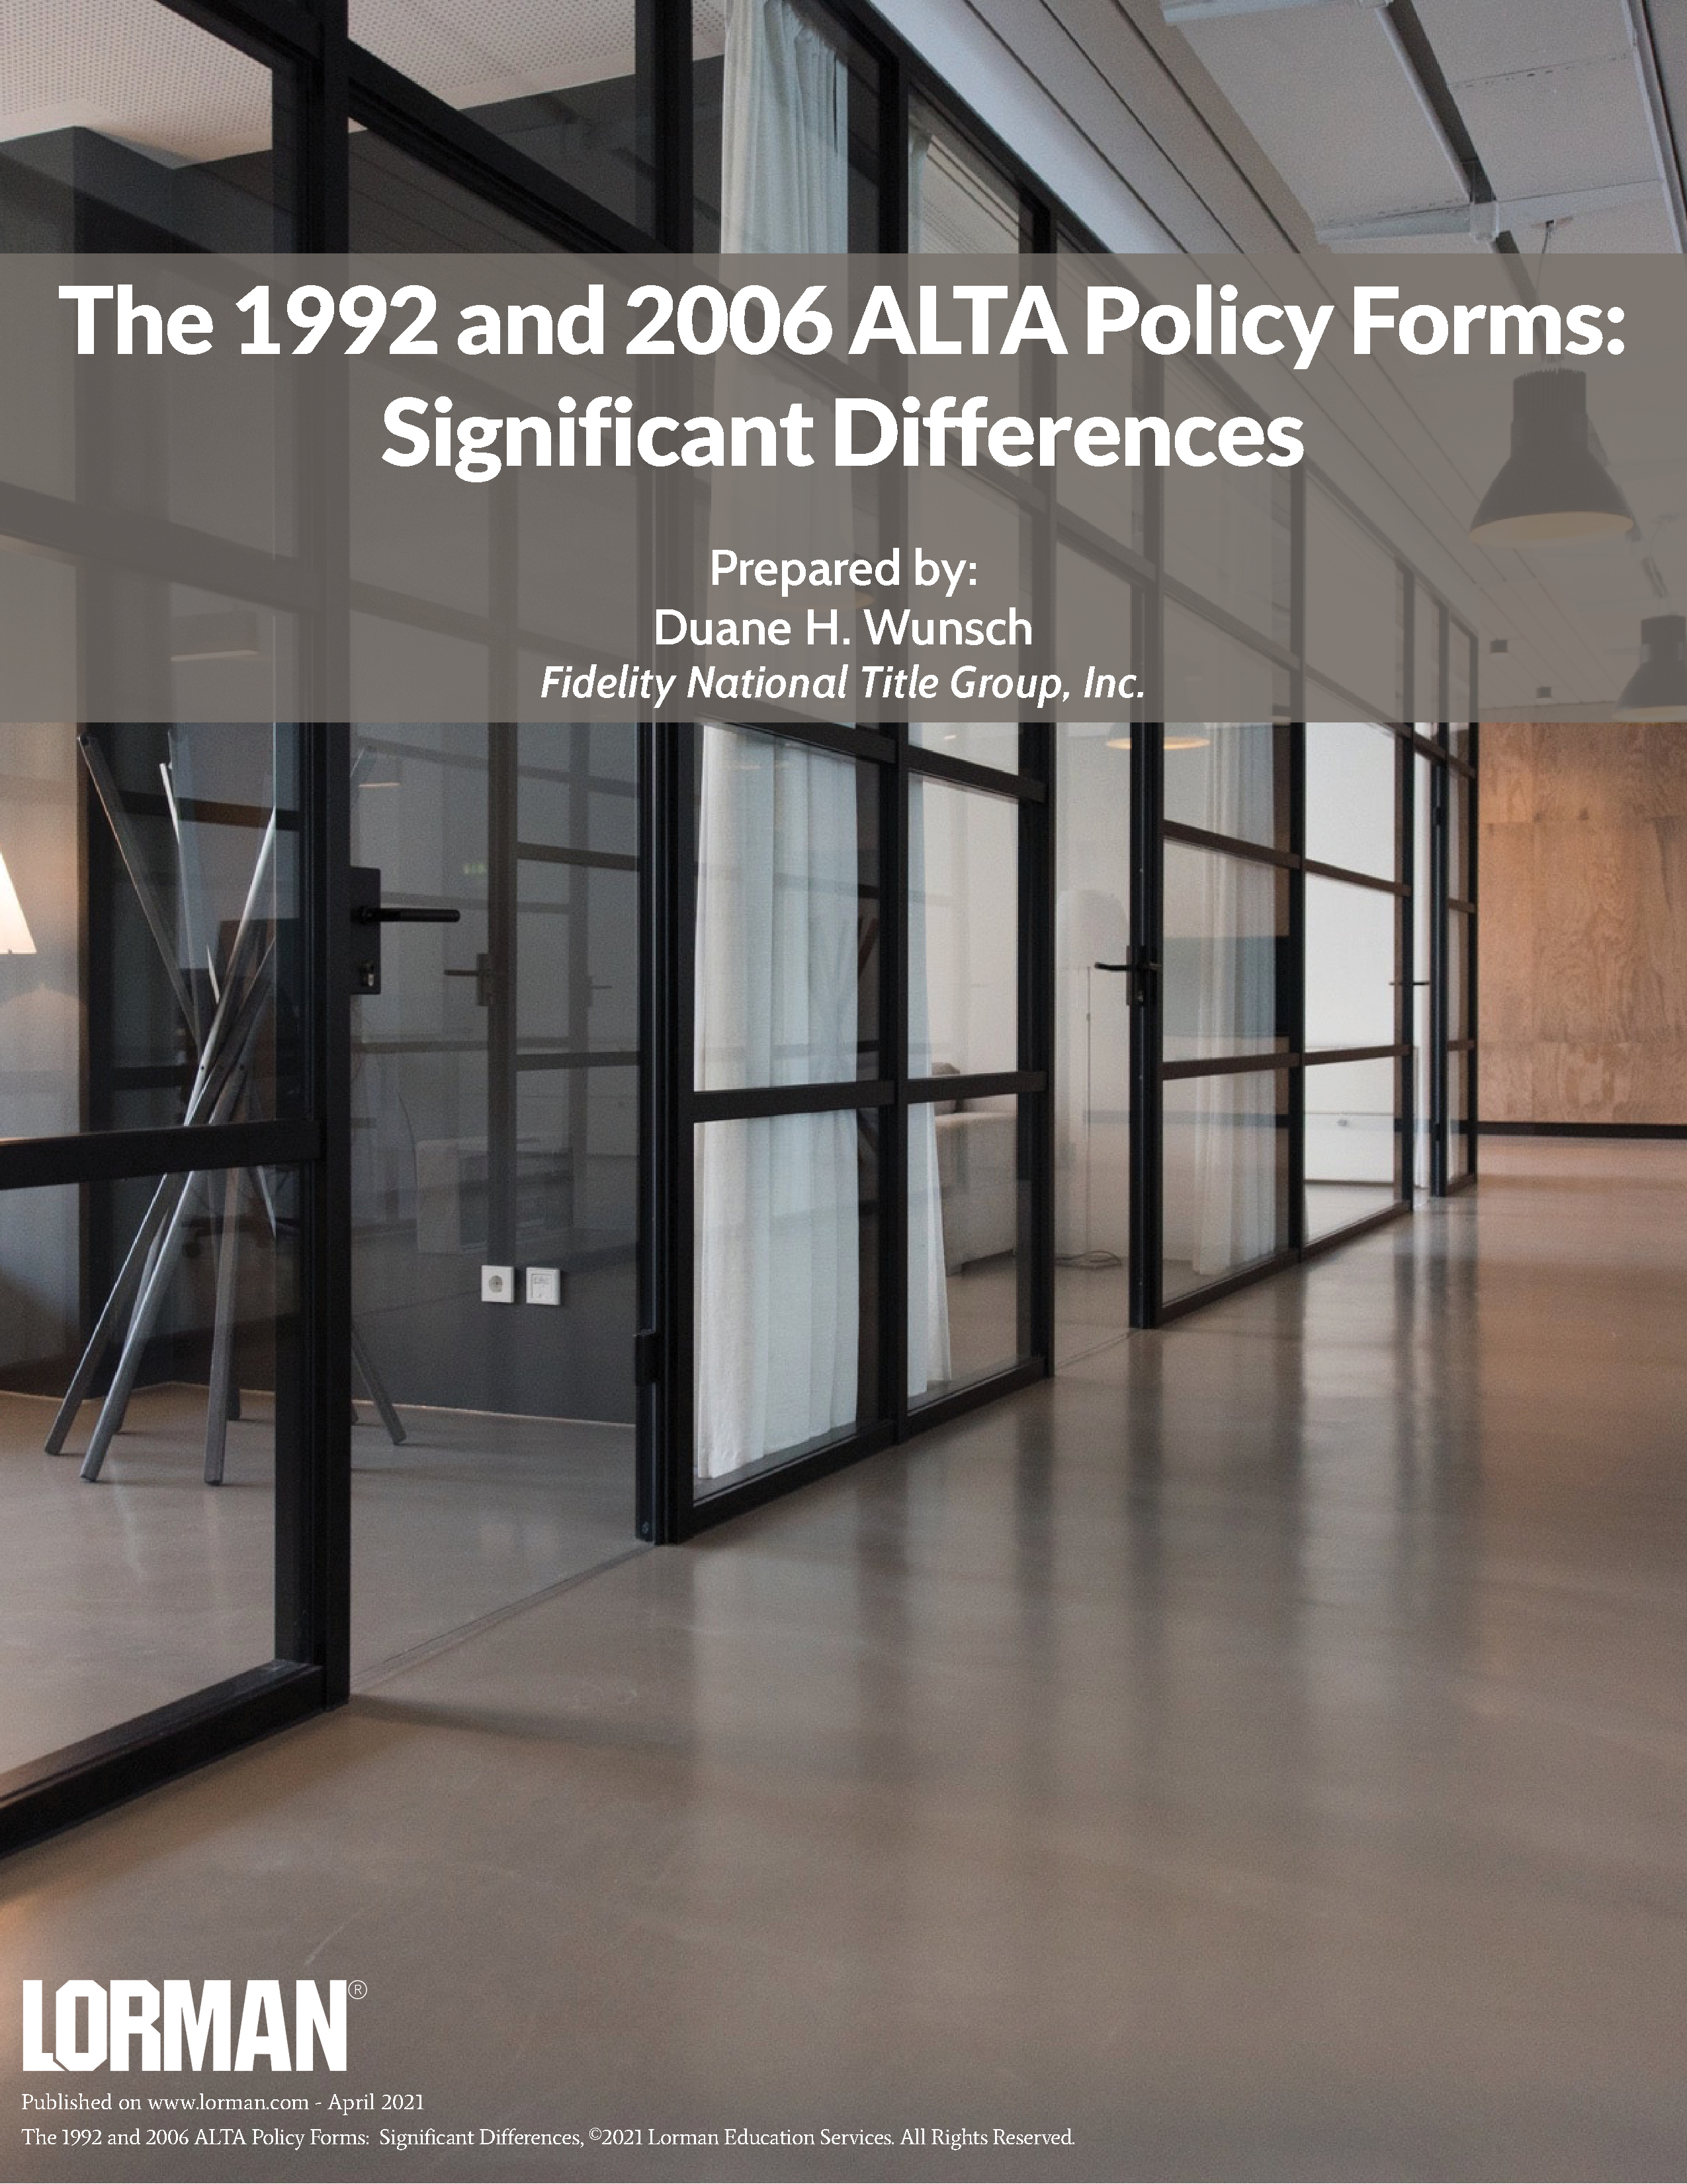 The 1992 and 2006 ALTA Policy Forms: Significant Differences